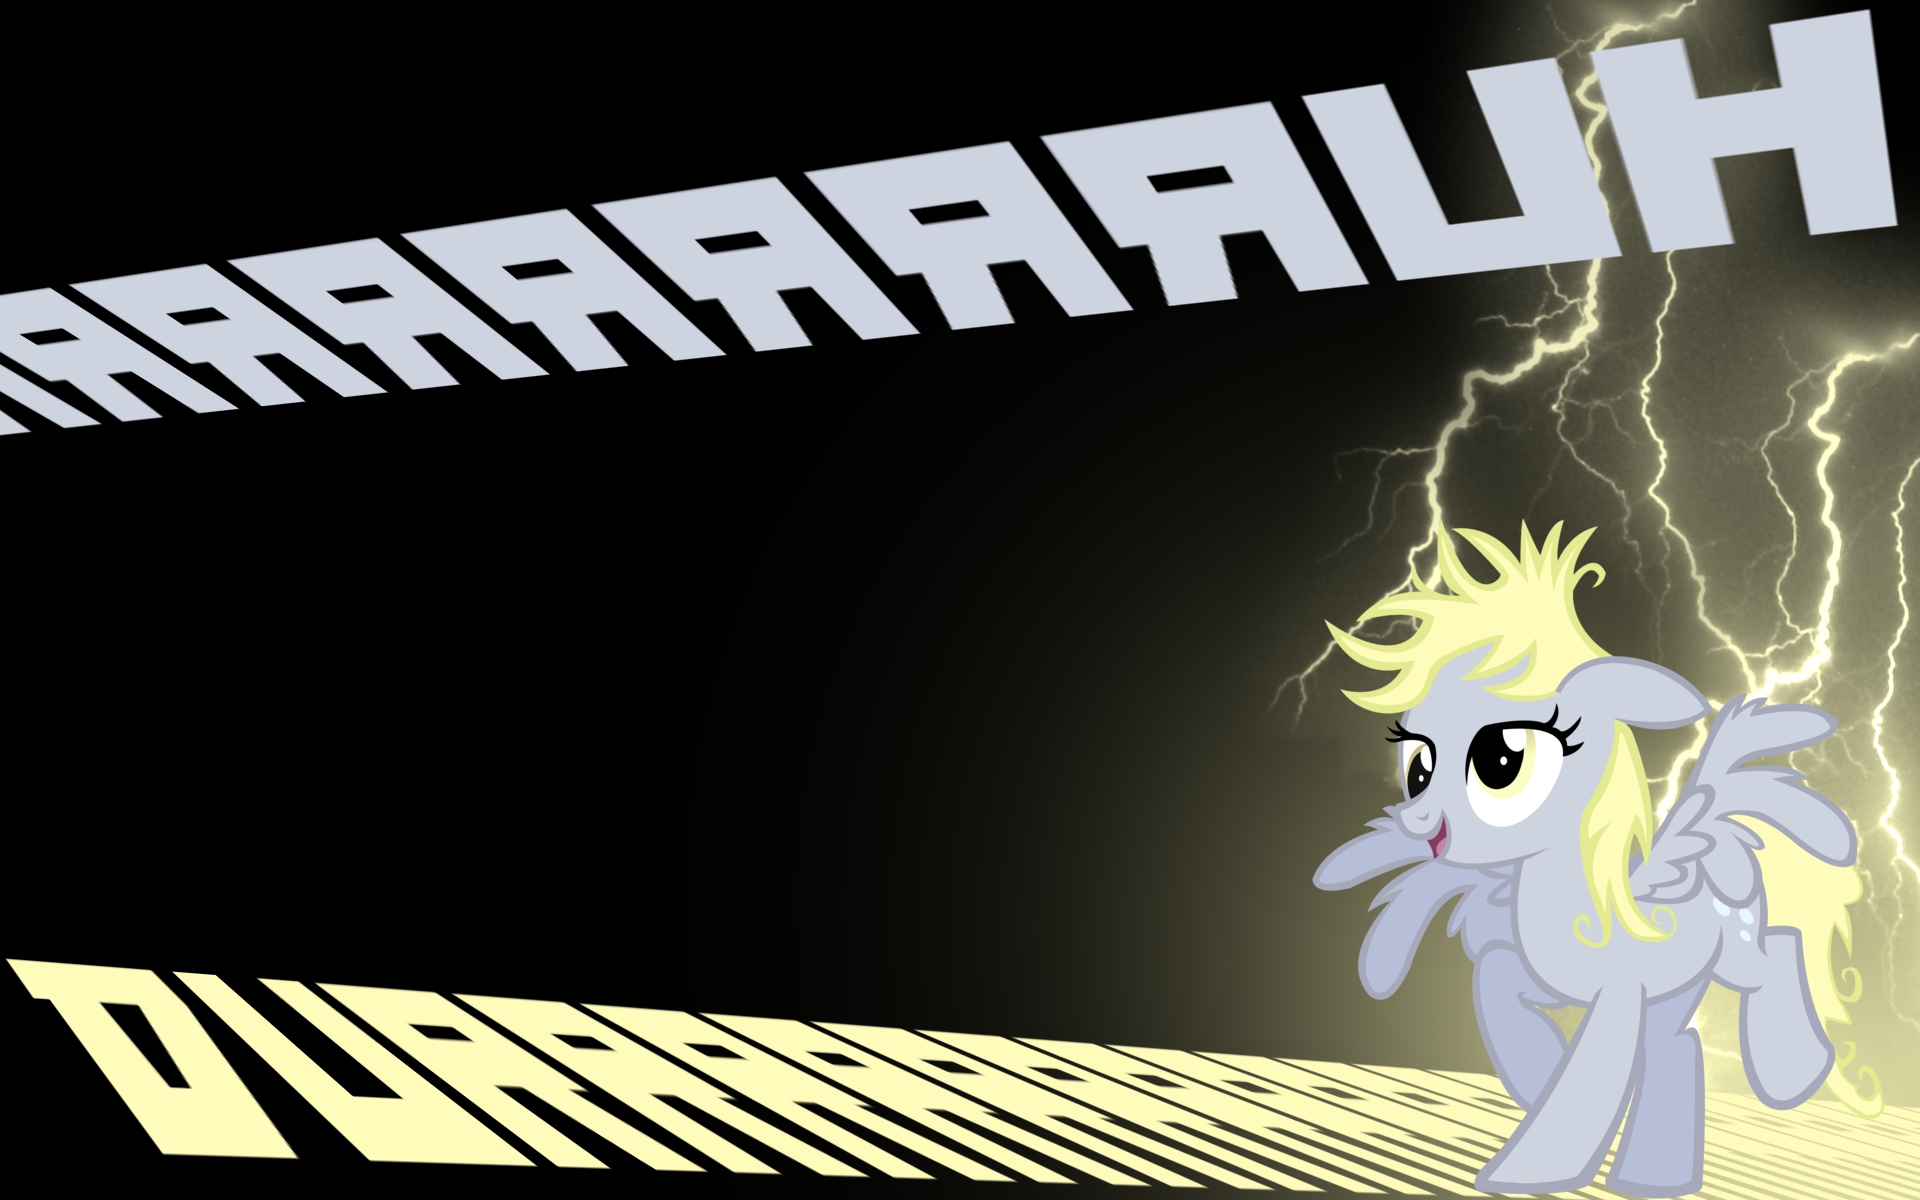 Bad derpy wallpaper by TomppaBrony